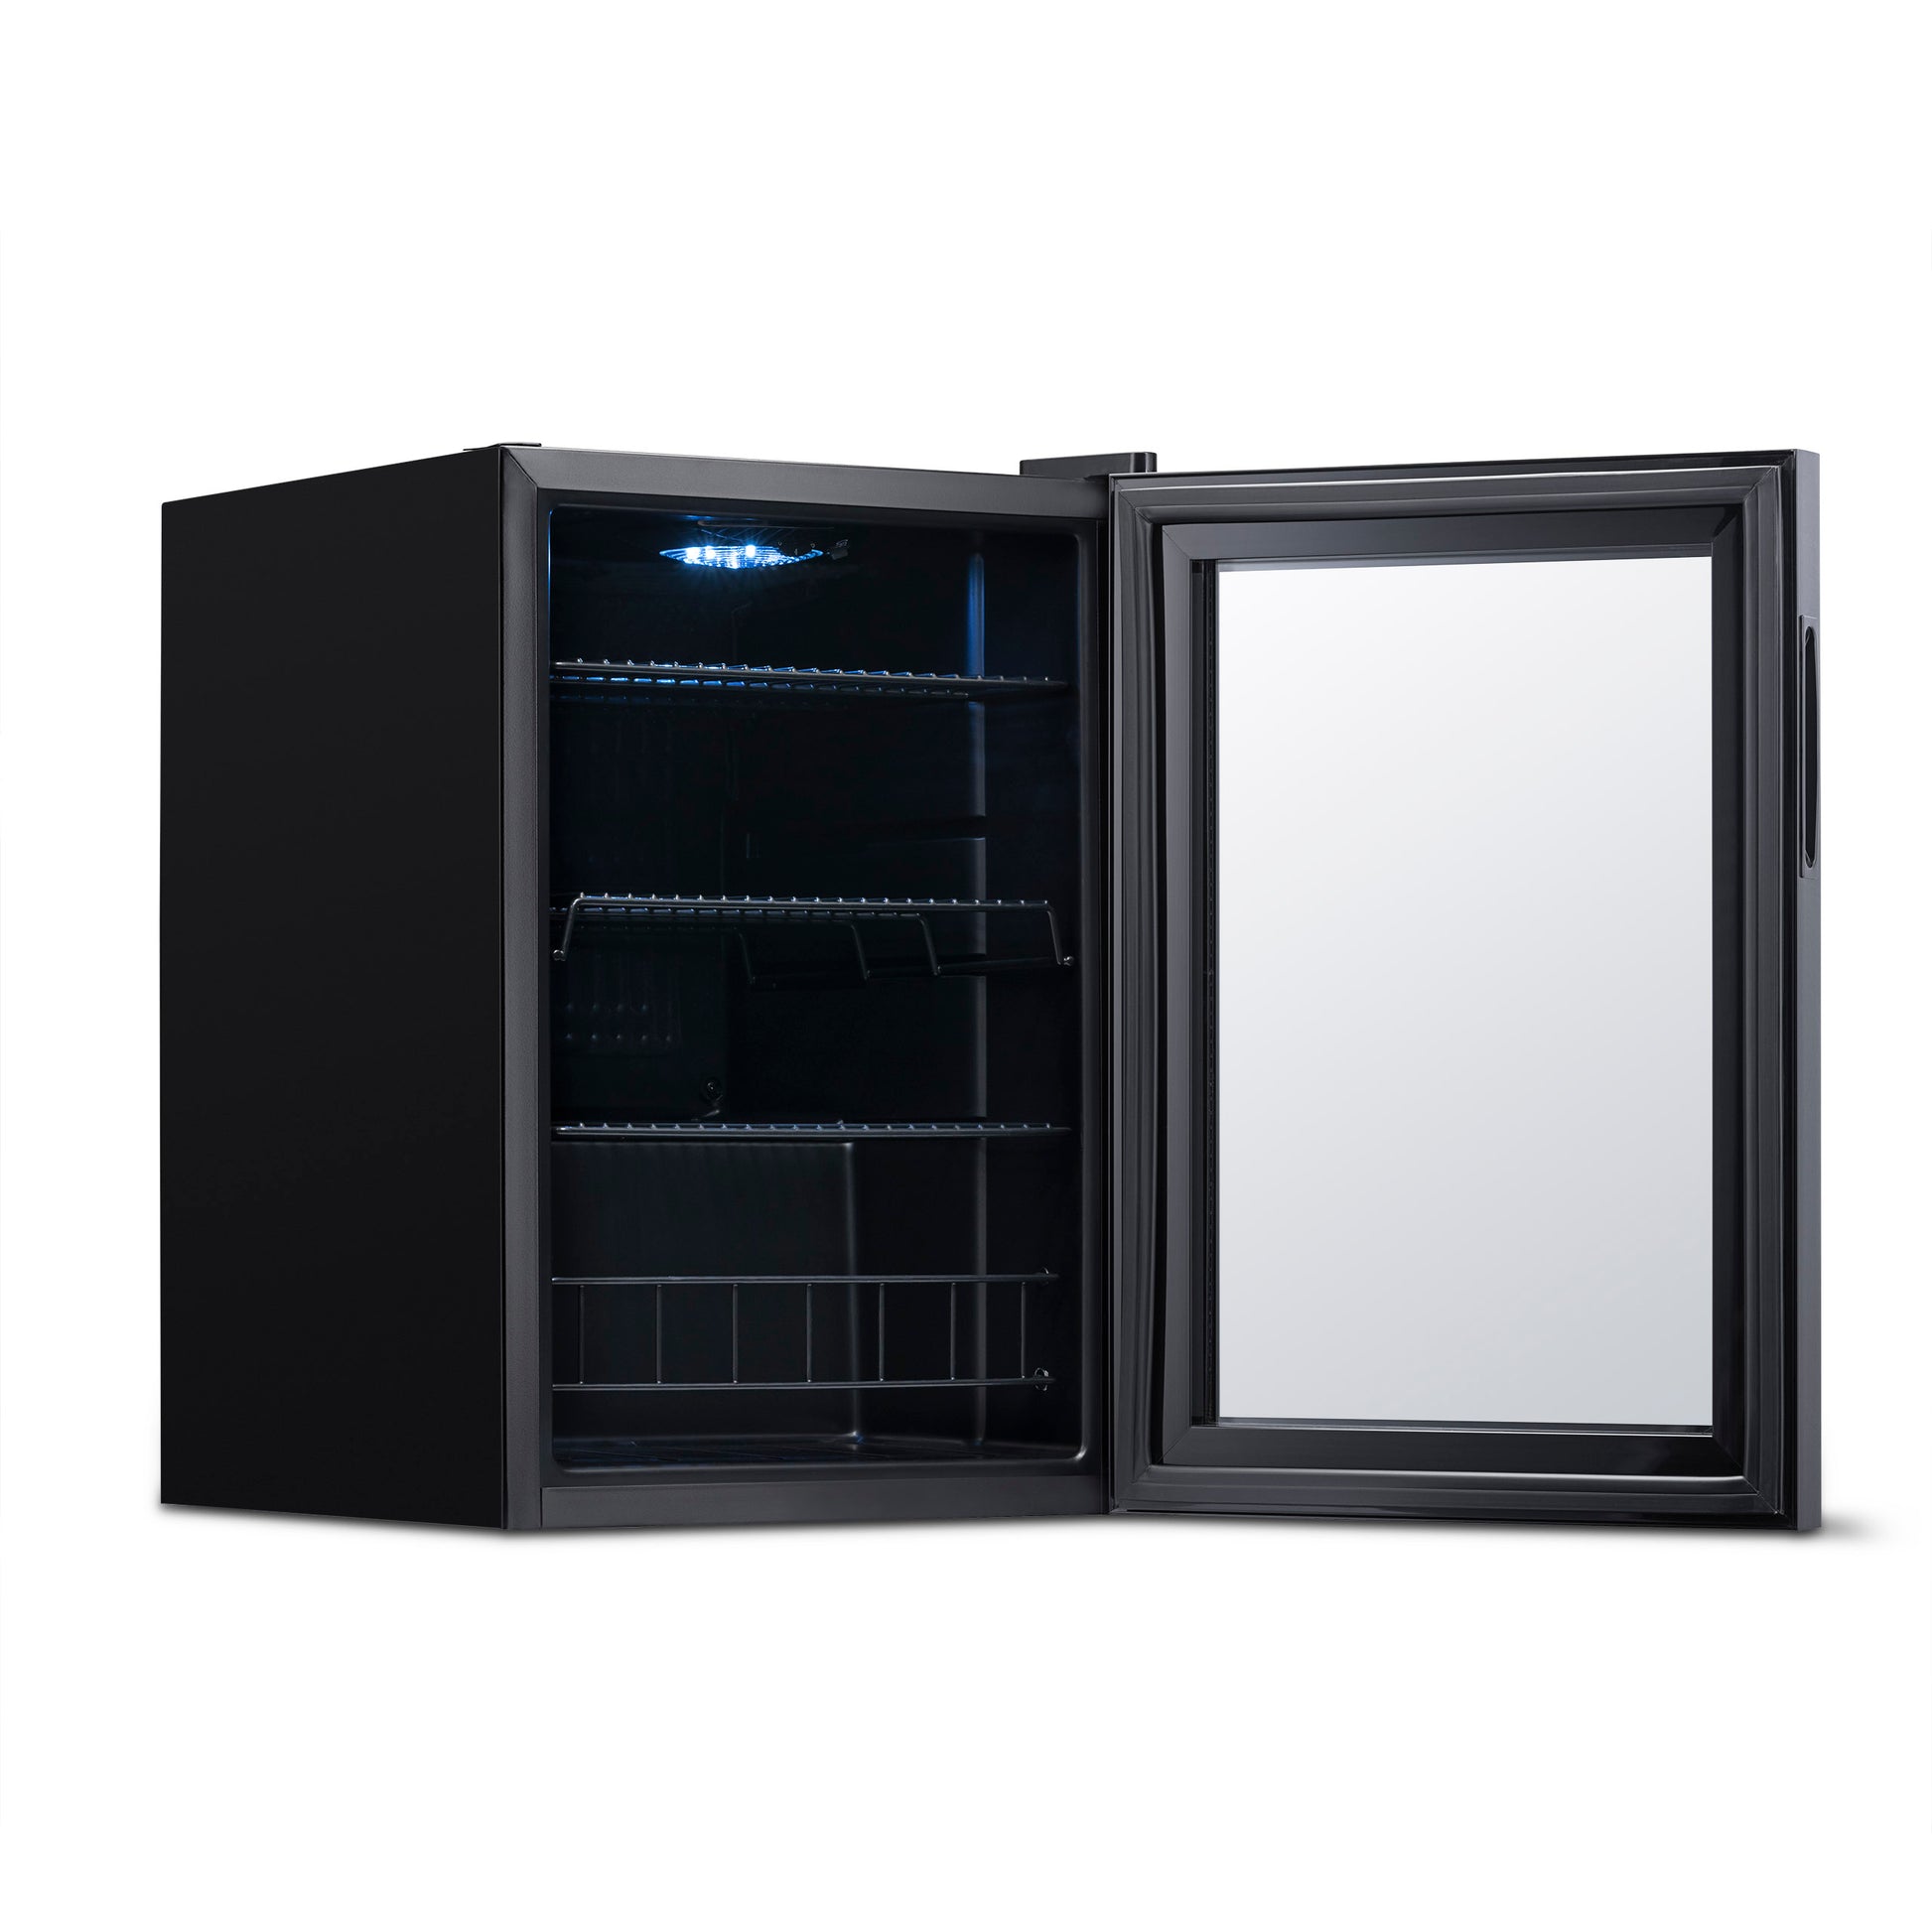 Newair 90 Can Freestanding Beverage Fridge in Onyx Black, with Adjustable Shelves and Lock AB-850B-Beverage Fridges-The Wine Cooler Club